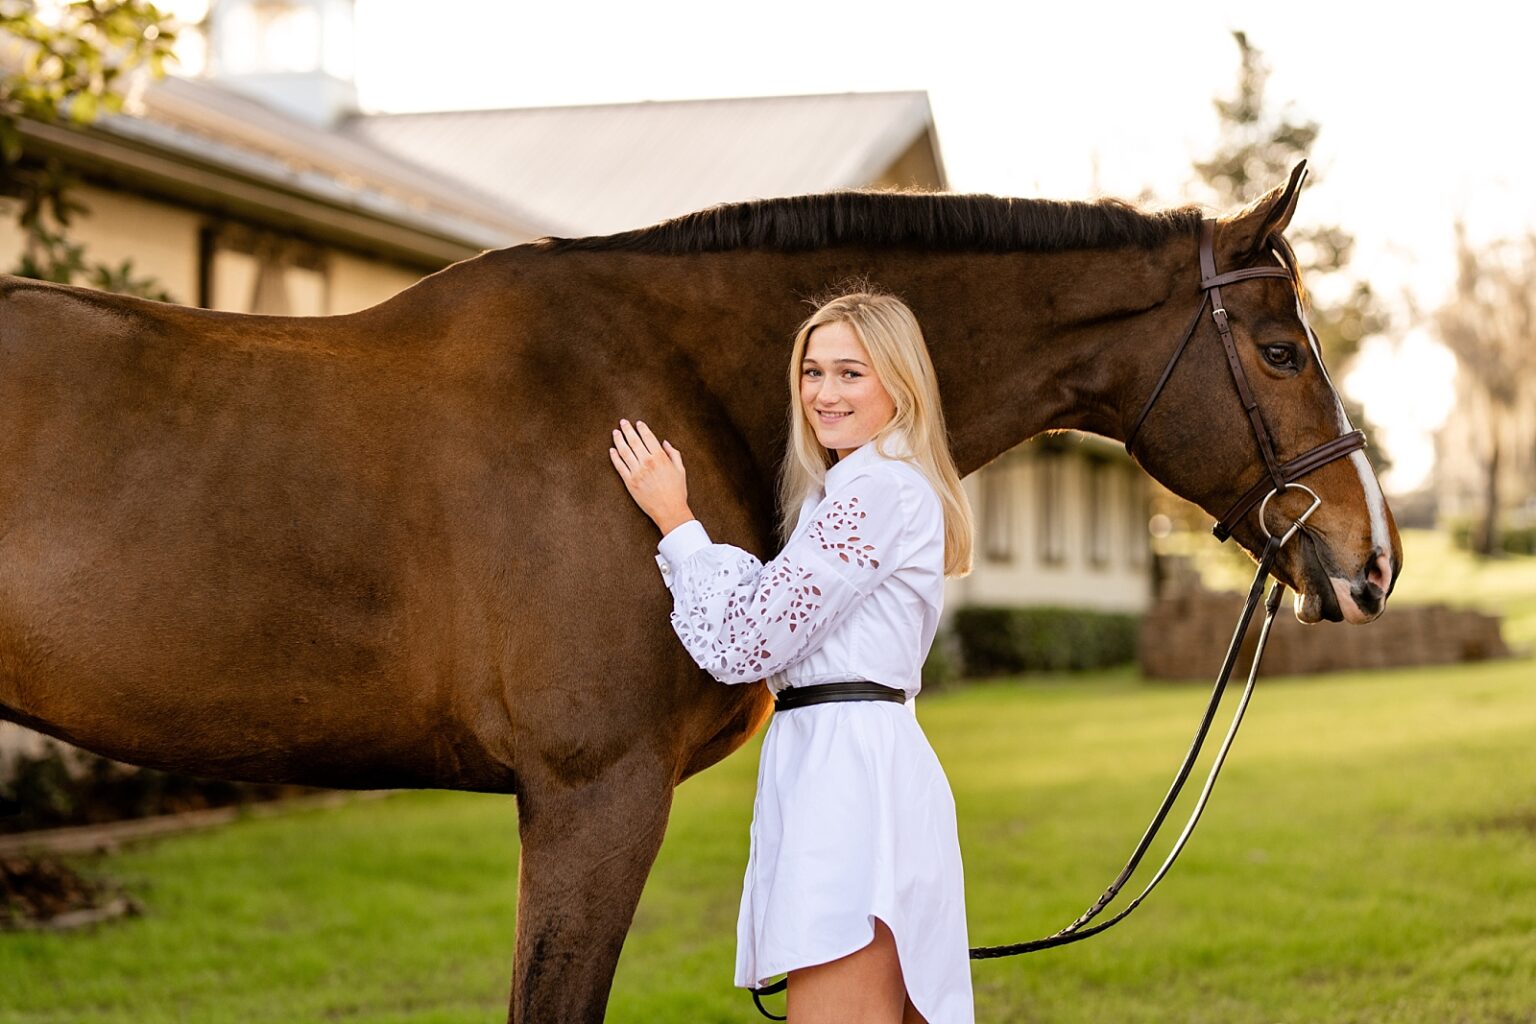 Equestrian inspired senior outfit for senior pictures. White dress with equestrian belt and tall boots. Ocala, FL. Hunter/jumper rider. Golden Oaks Farm LLC. Posing with horses. Sunset.